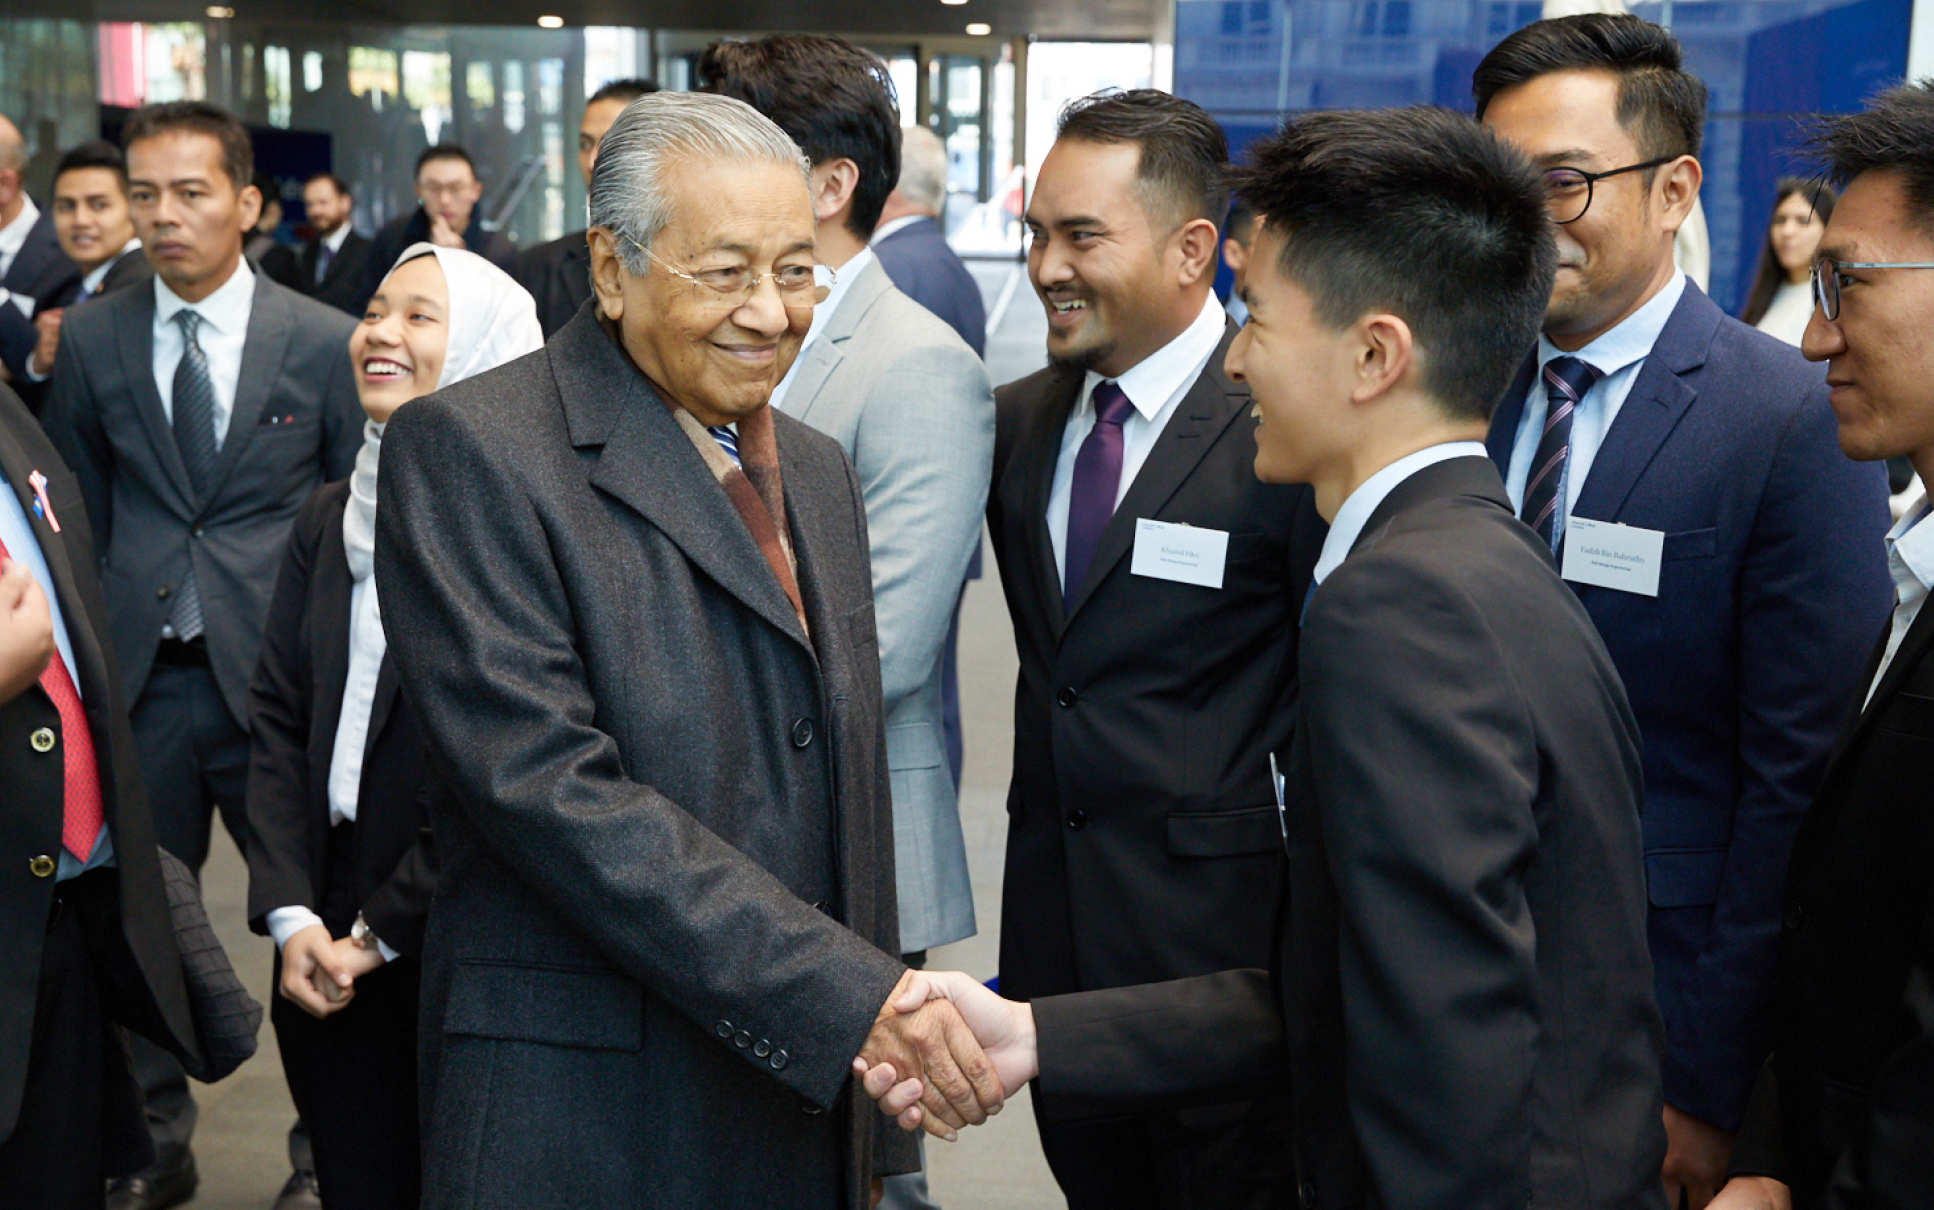 The PM meeting Malaysian students